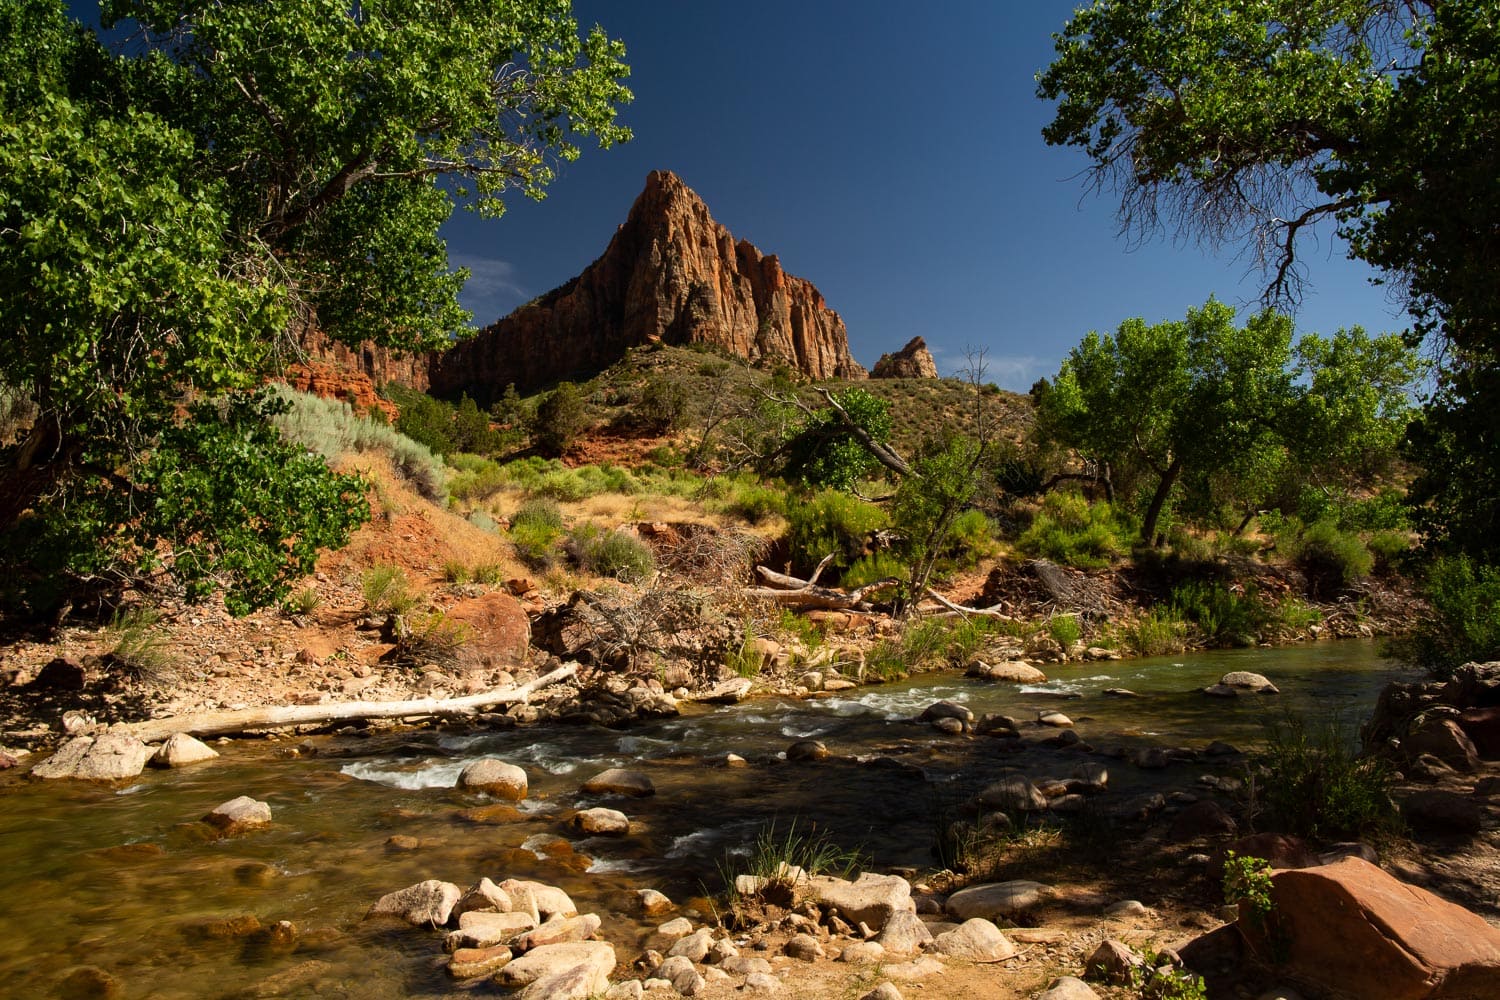 A landscape photo of The Watchman mountain in Zion National Park.